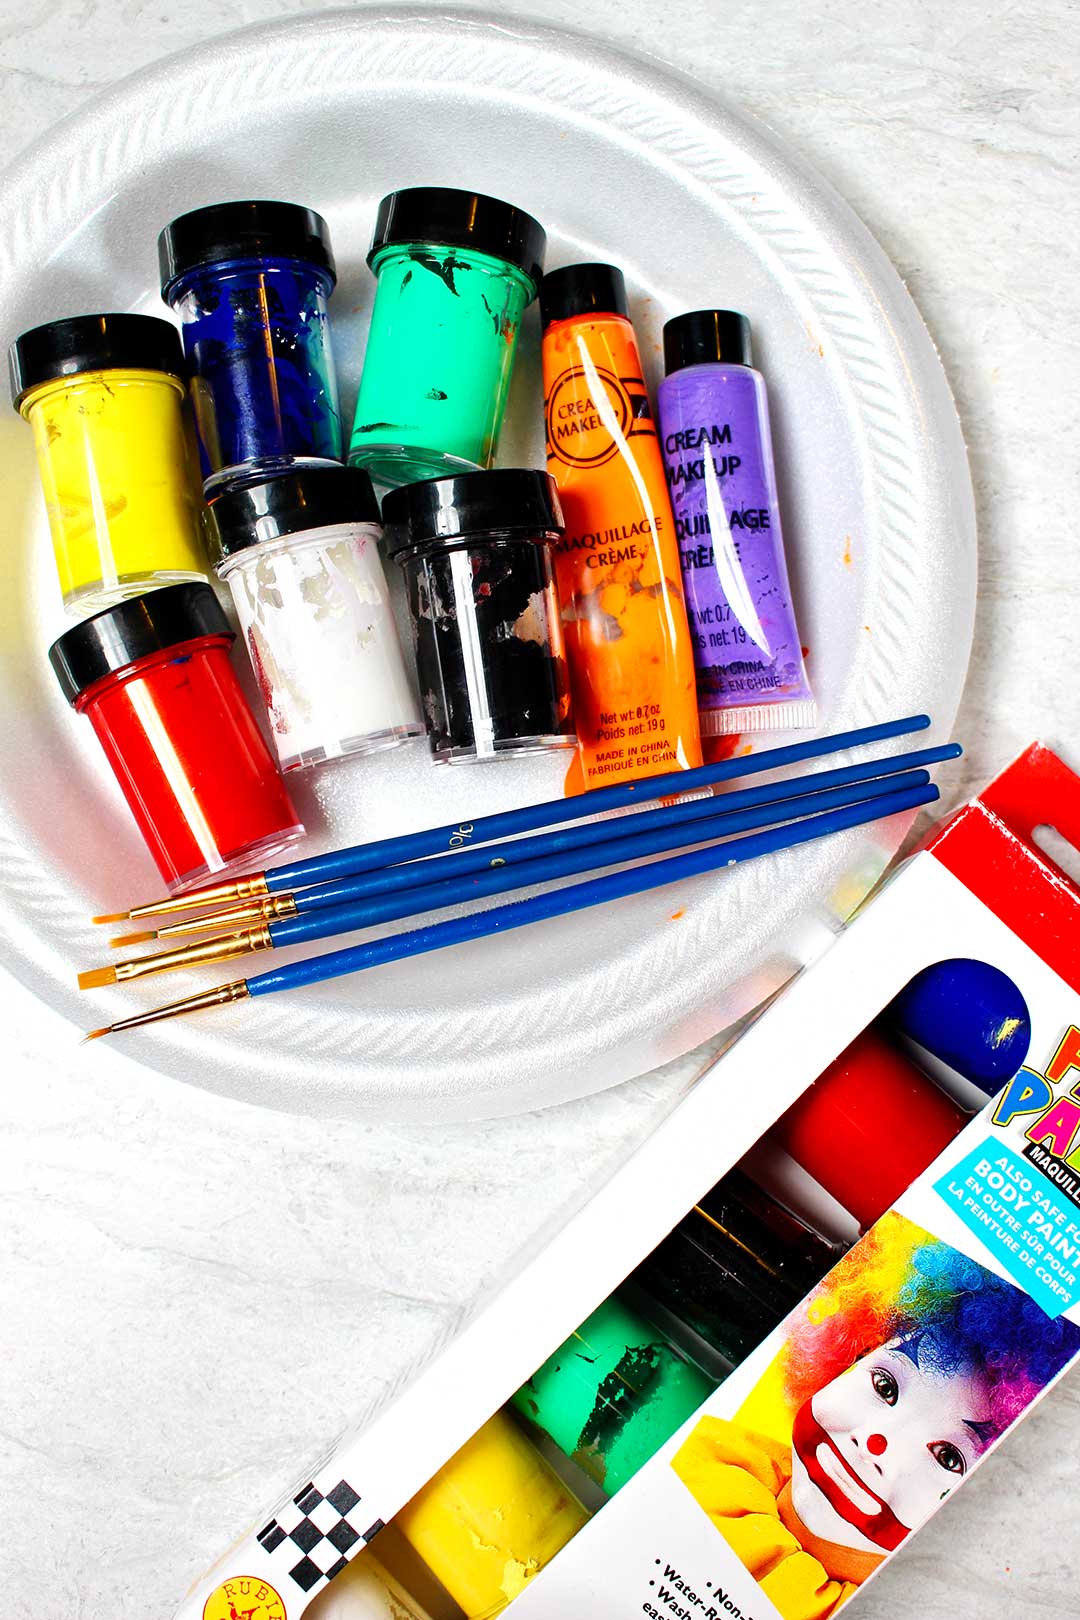 White plate with containers of colored paints and paint brushes near by.